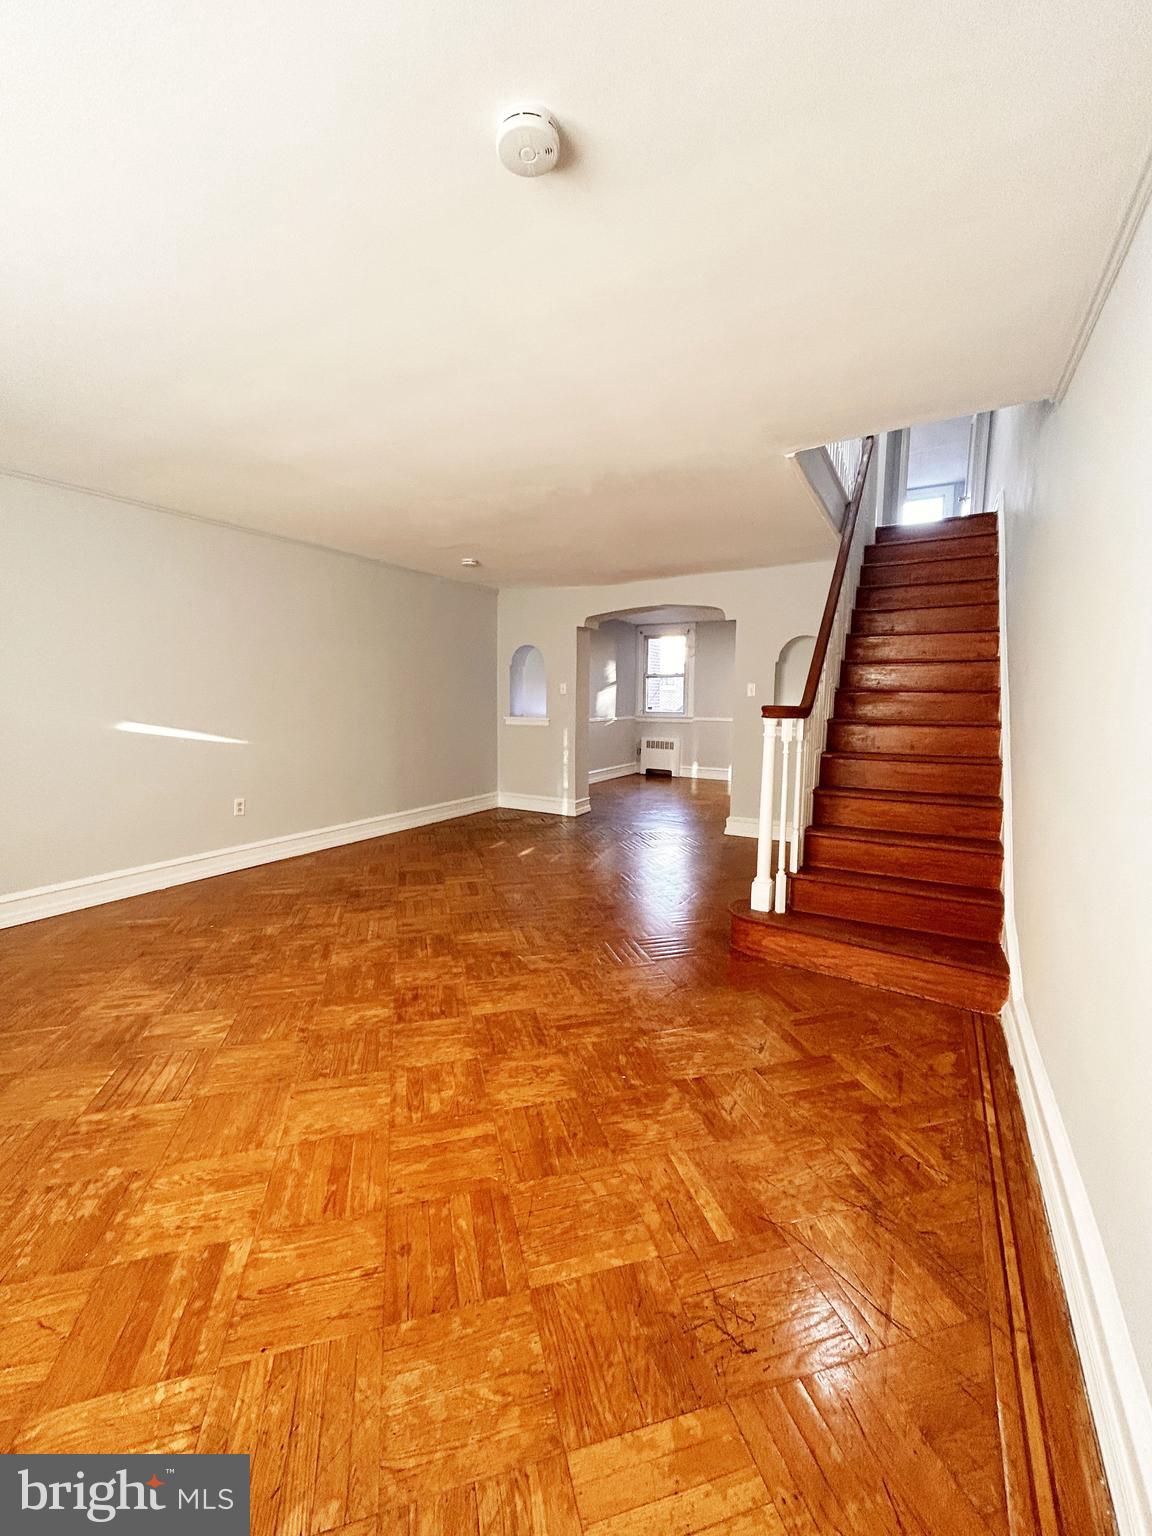 wooden floor in an empty room with stairs